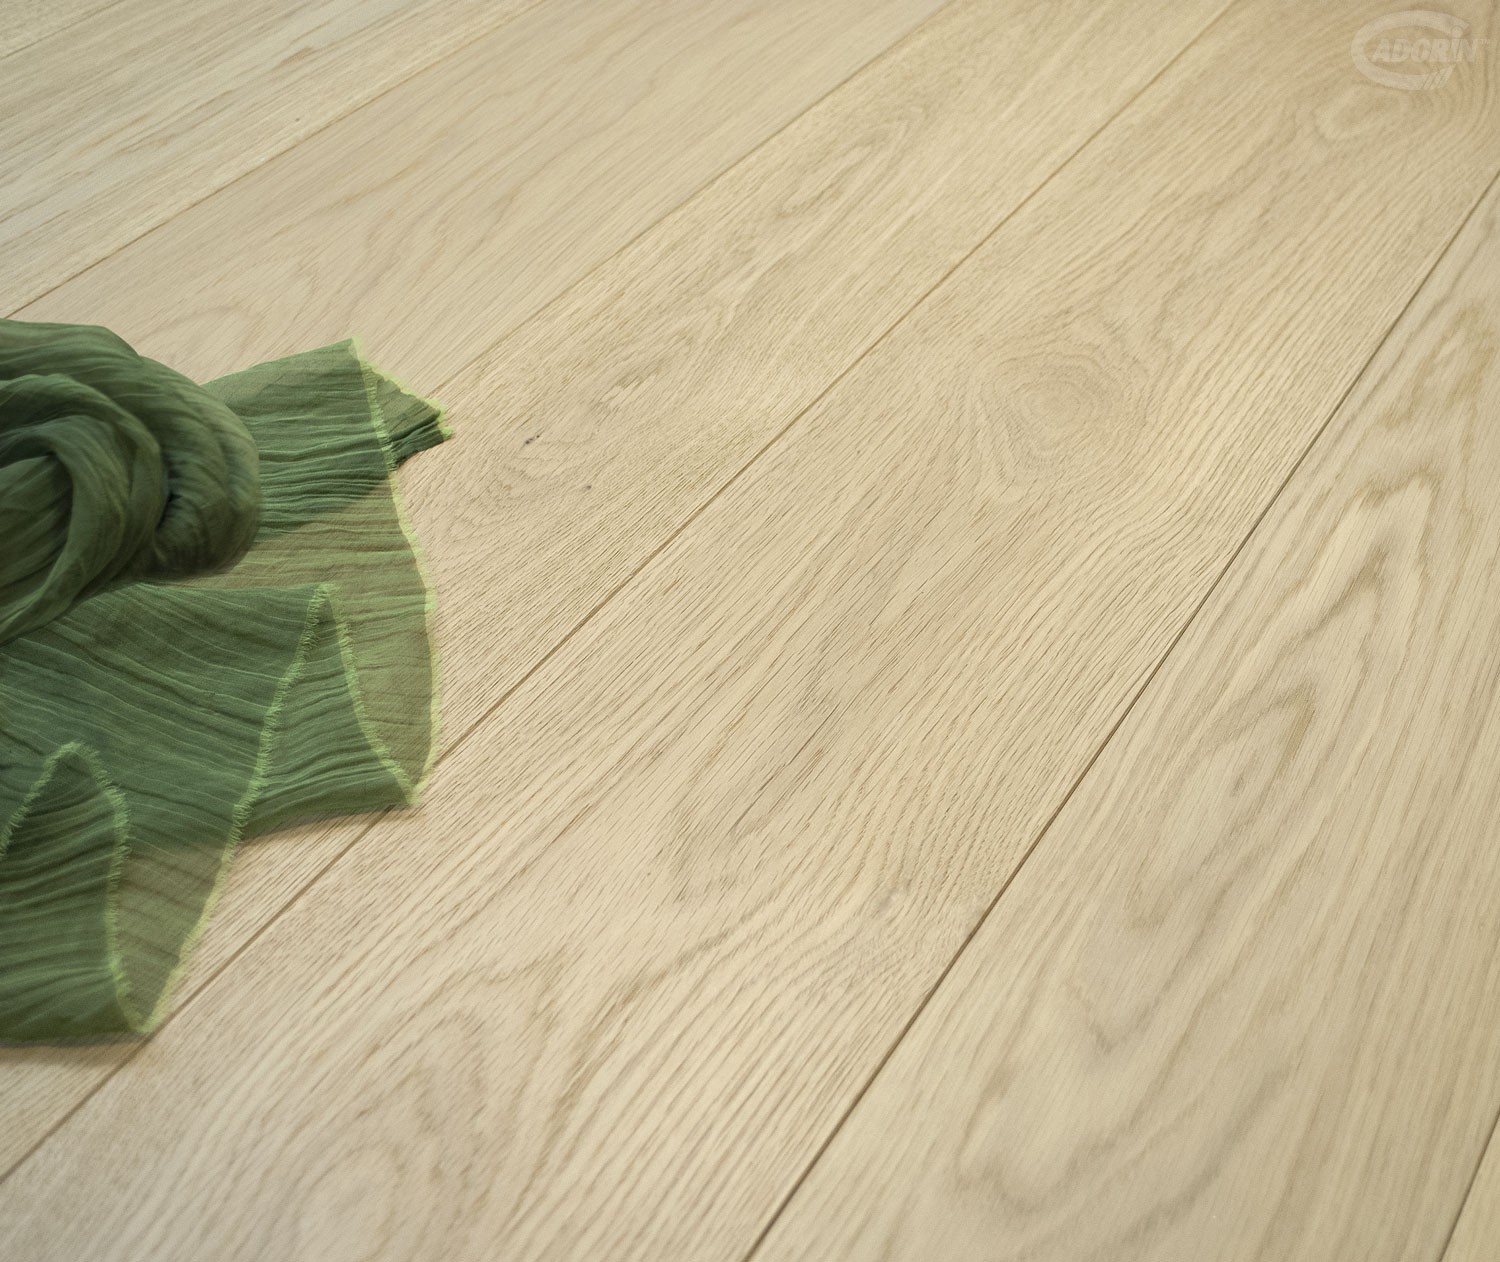 European Select Oak - Brushed and rough effect